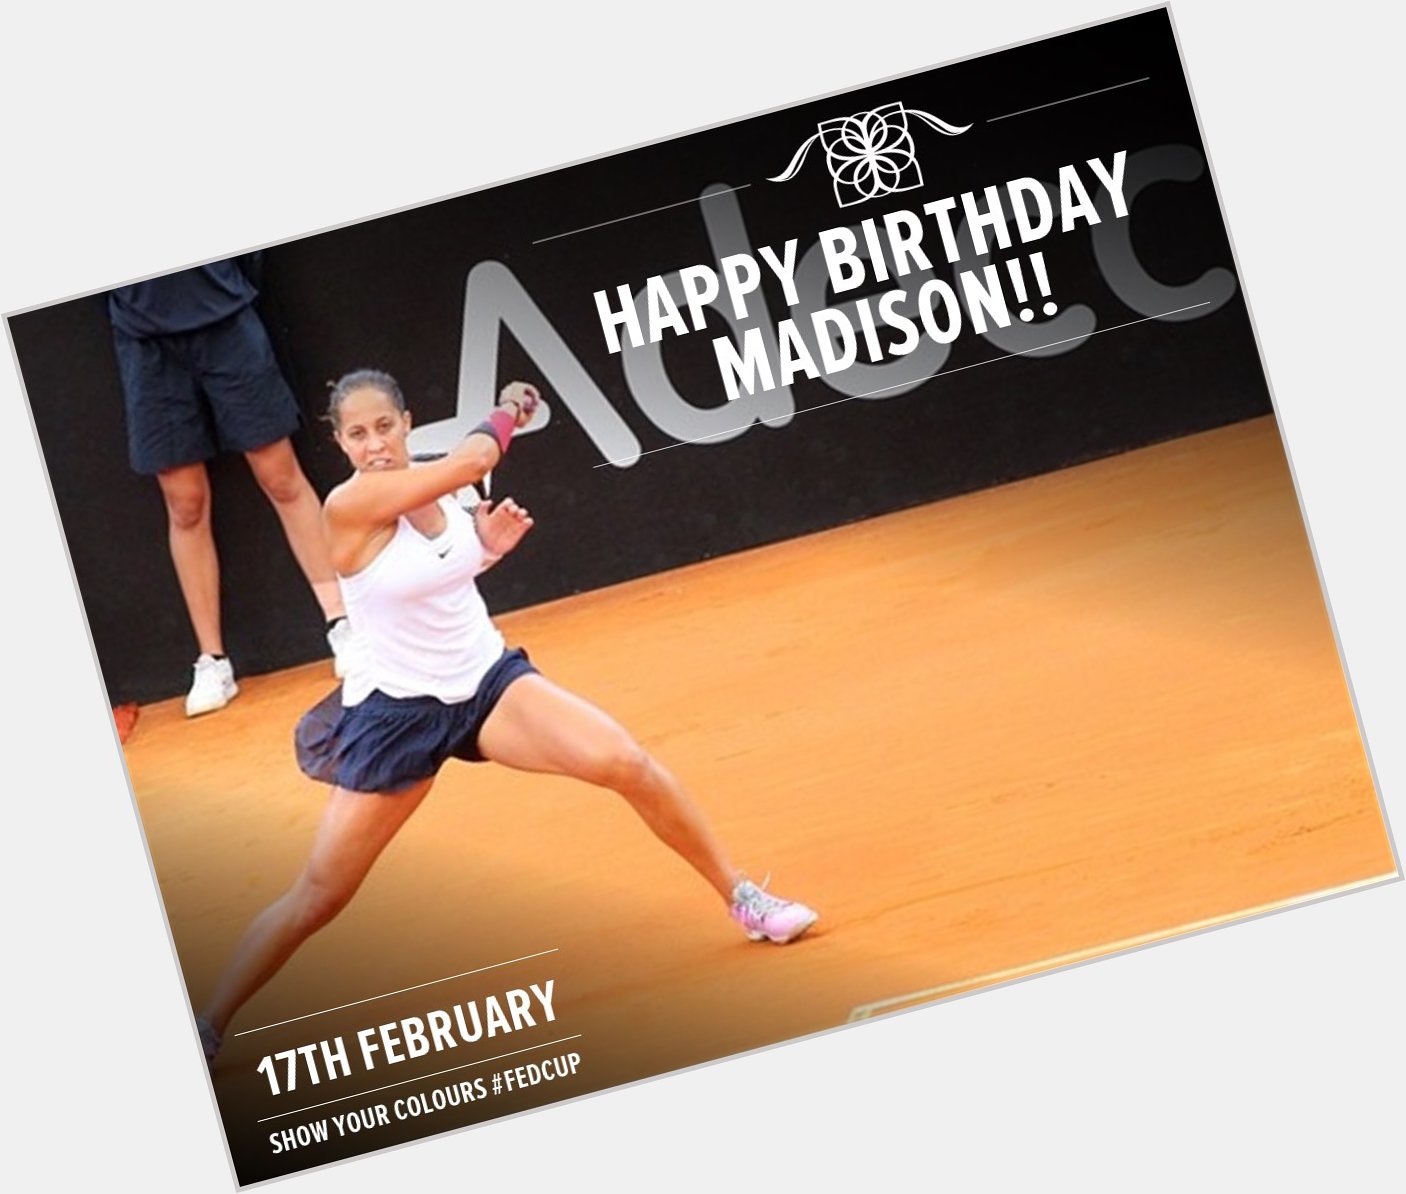 Via: FedCup: Happy Birthday to Madison_Keys who has a 3-3 win-loss record through 3 ties for  